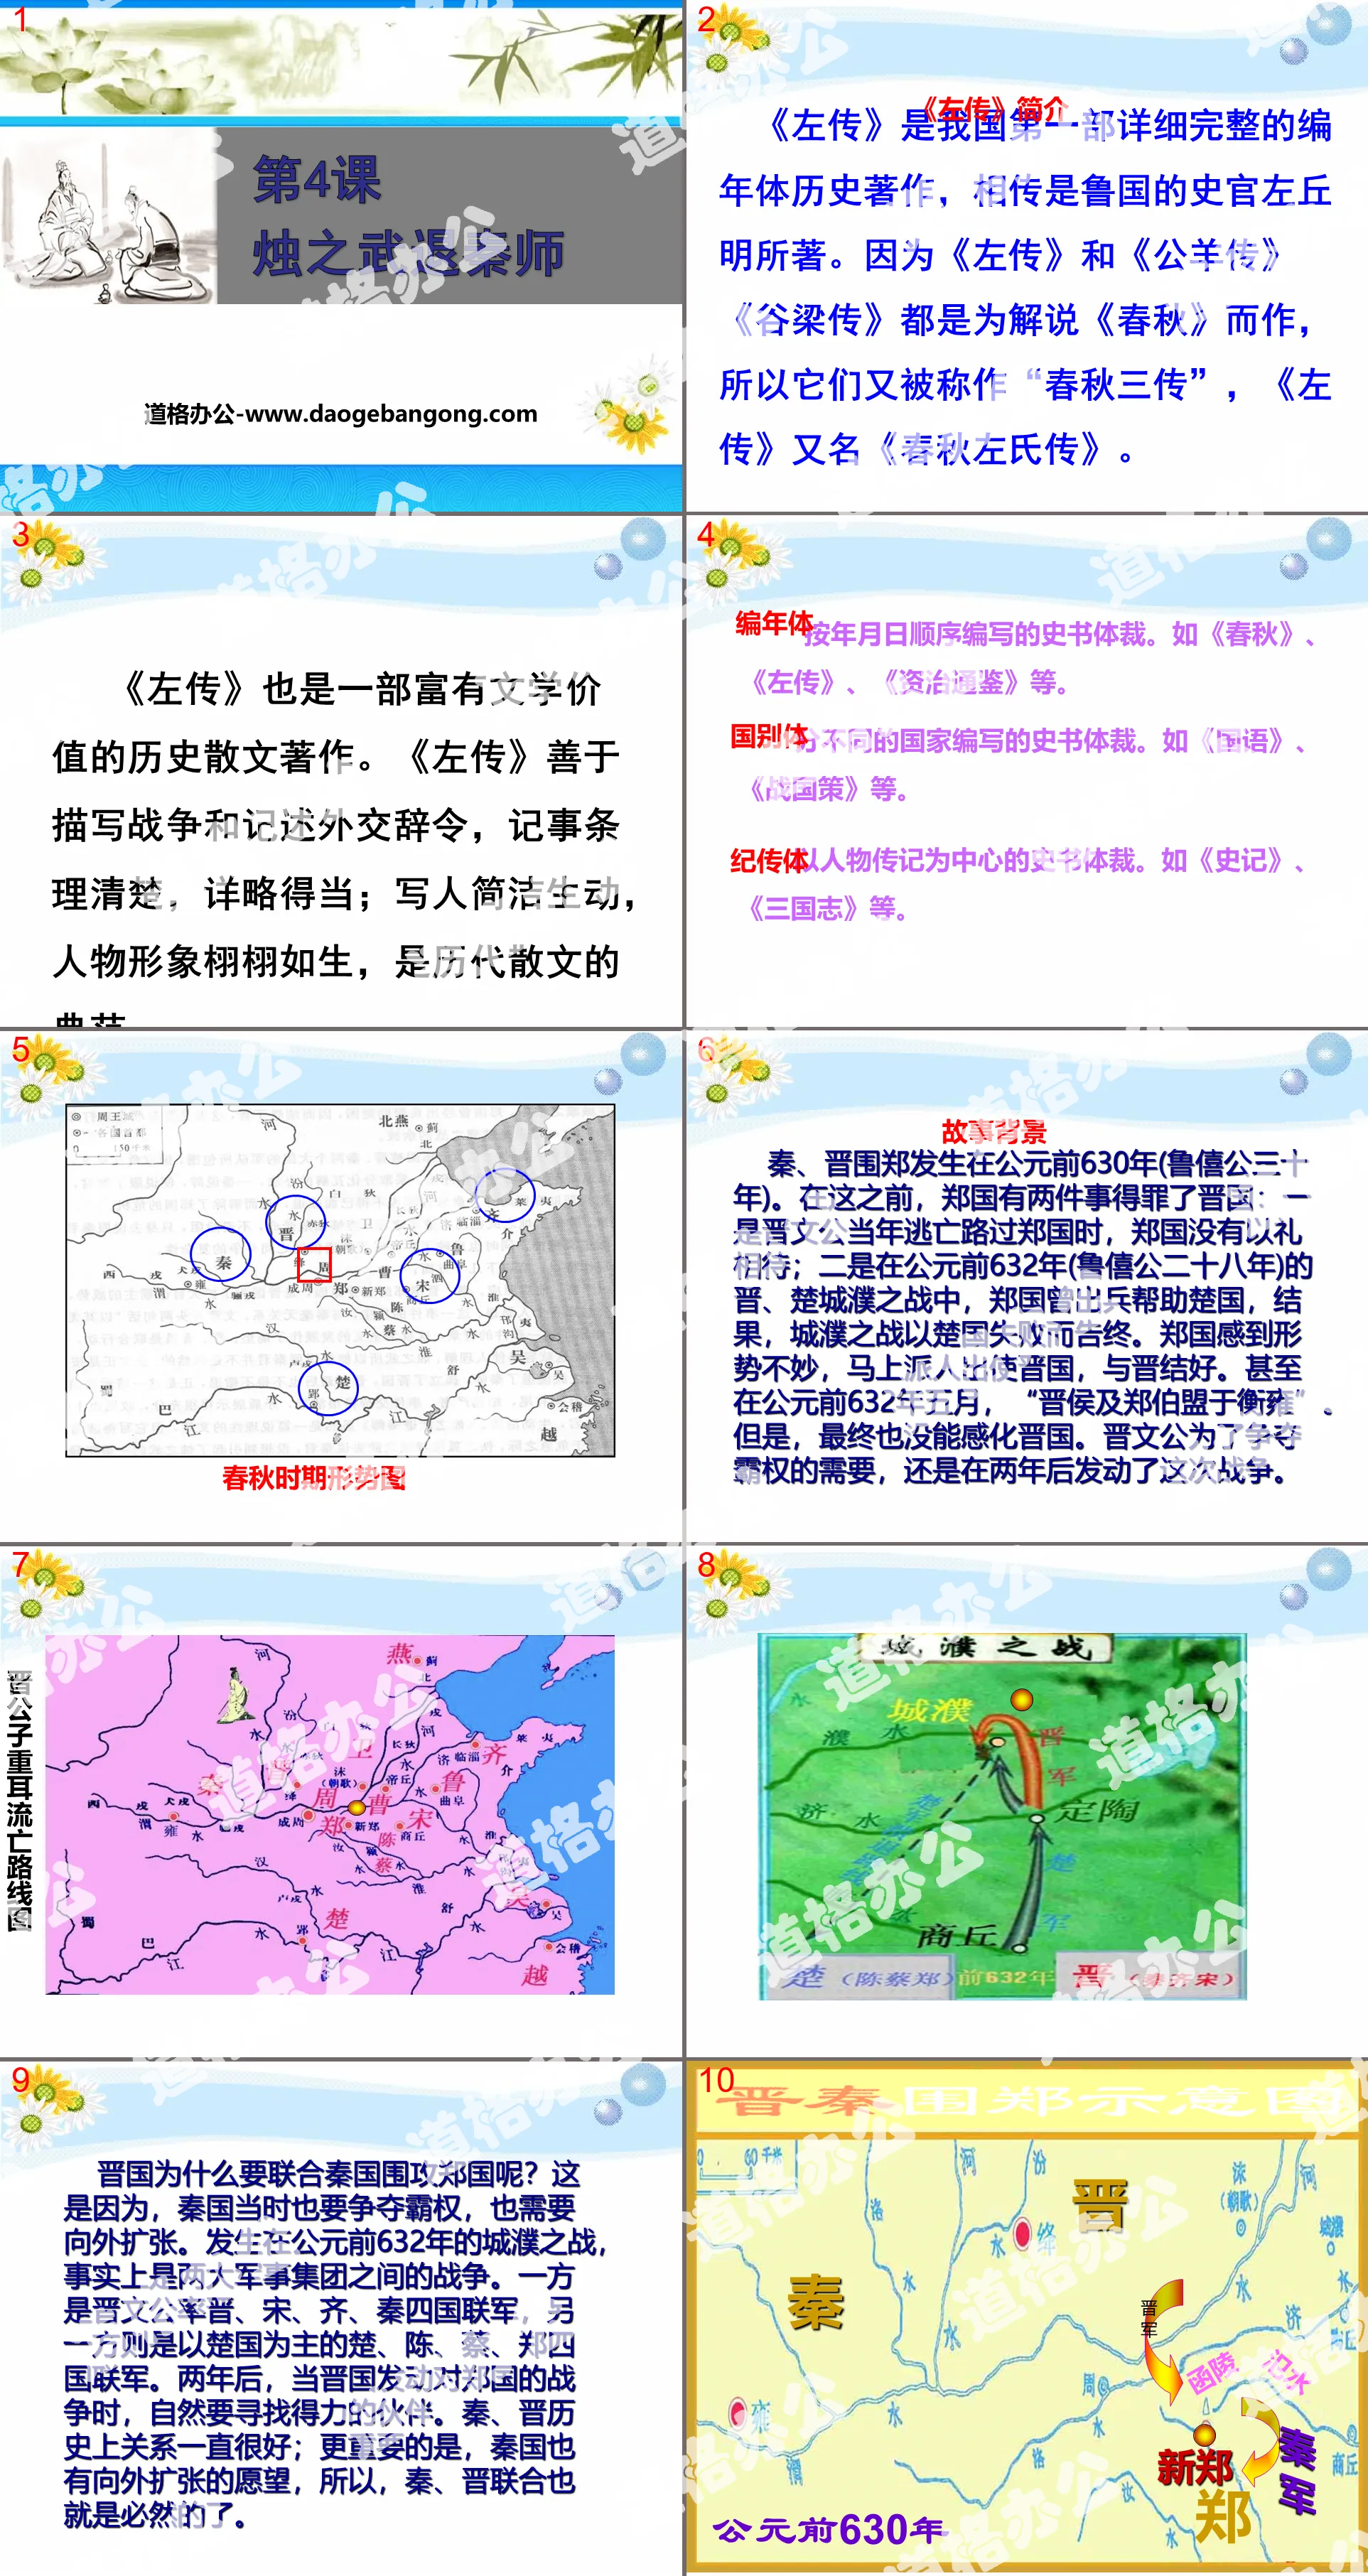 "Zhu Zhiwu retreats from the Qin division" PPT download